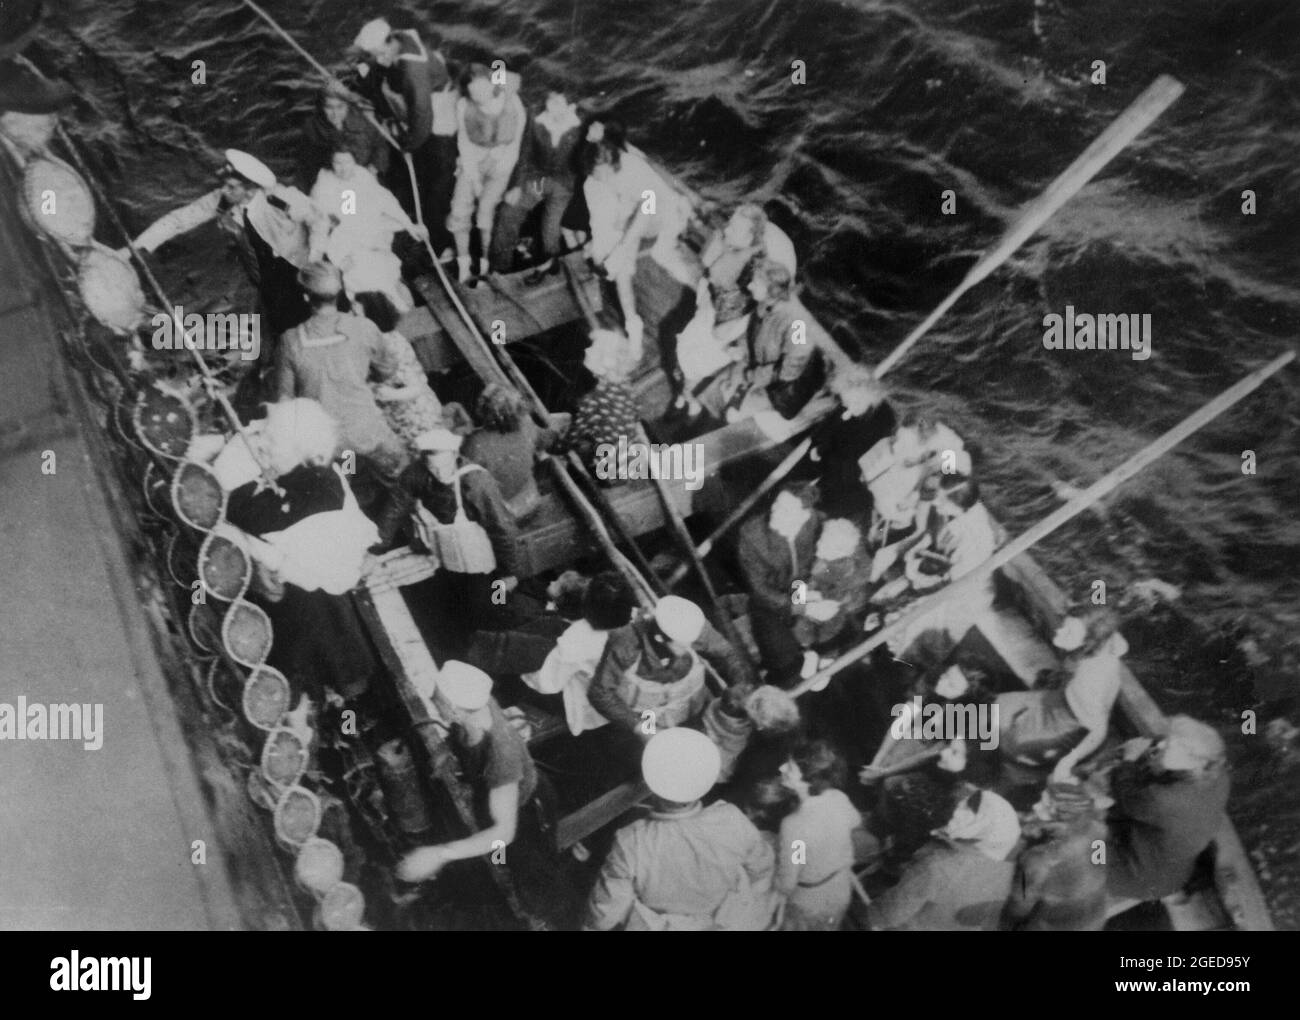 NORTH ATLANTIC OCEAN - 04 September 1939 - An elderly woman is hoisted aboard the American cargo steamship City of Flint after spending the night in a Stock Photo